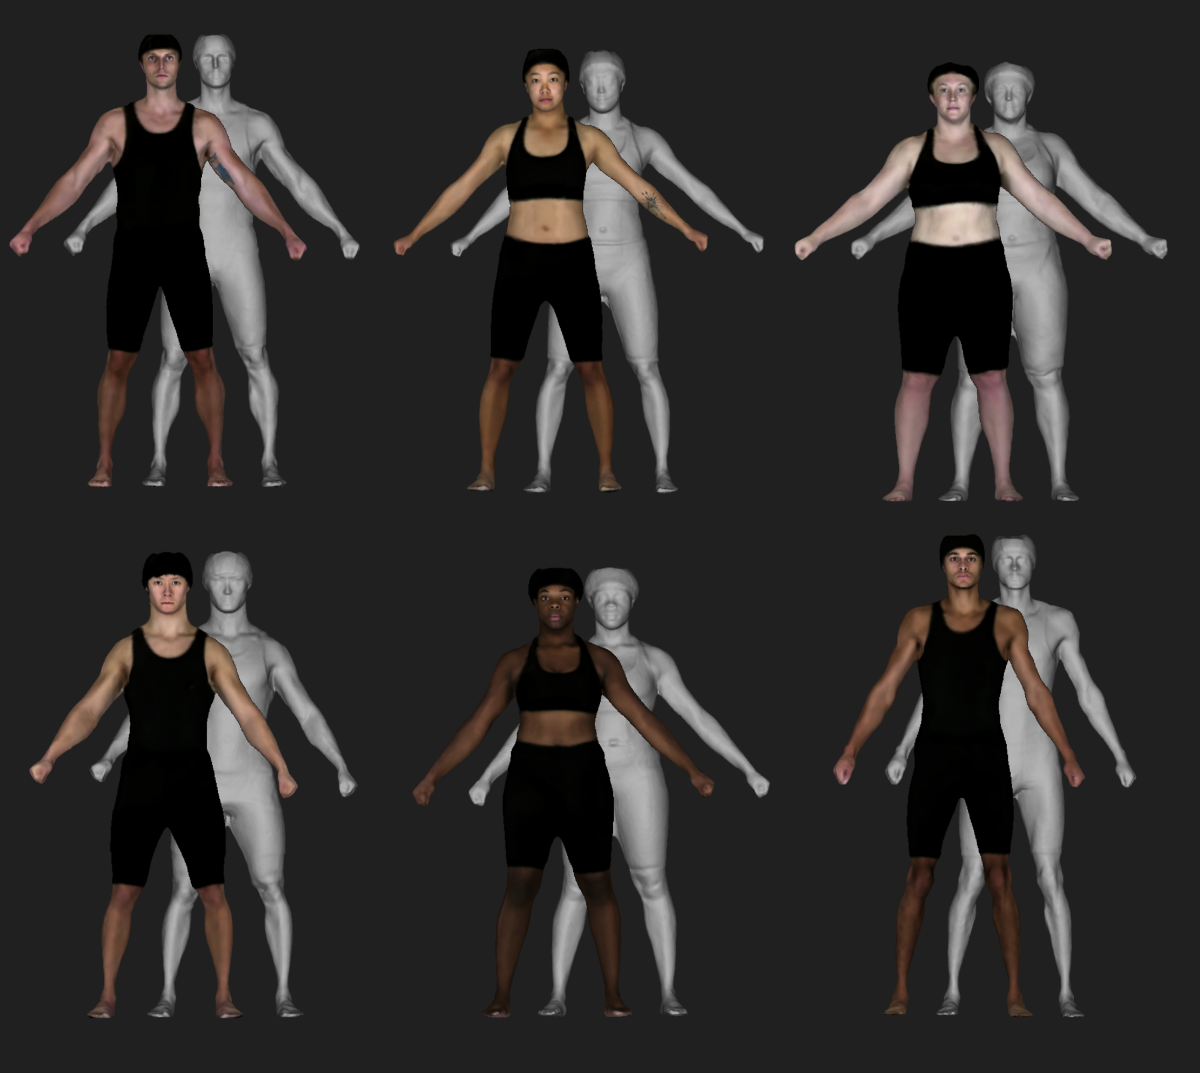 Computer generate images of people with texture